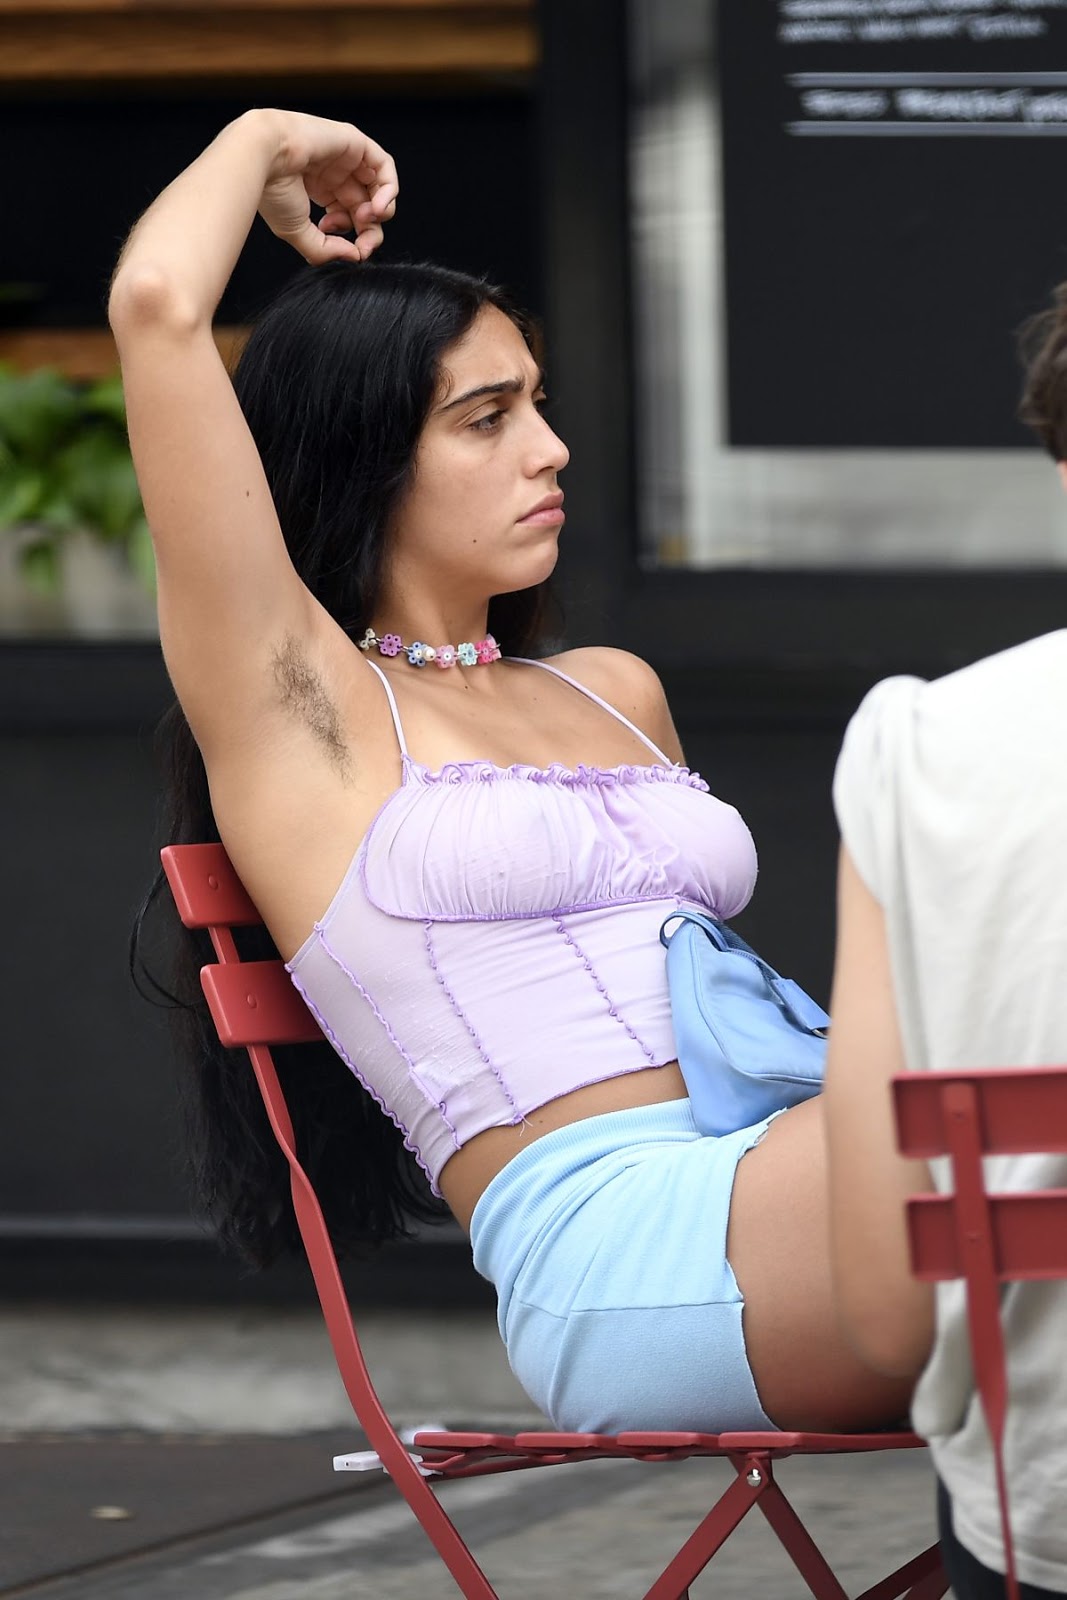 Lourdes Leon Spotted in a Shorts in New York 8 Jul -2020.